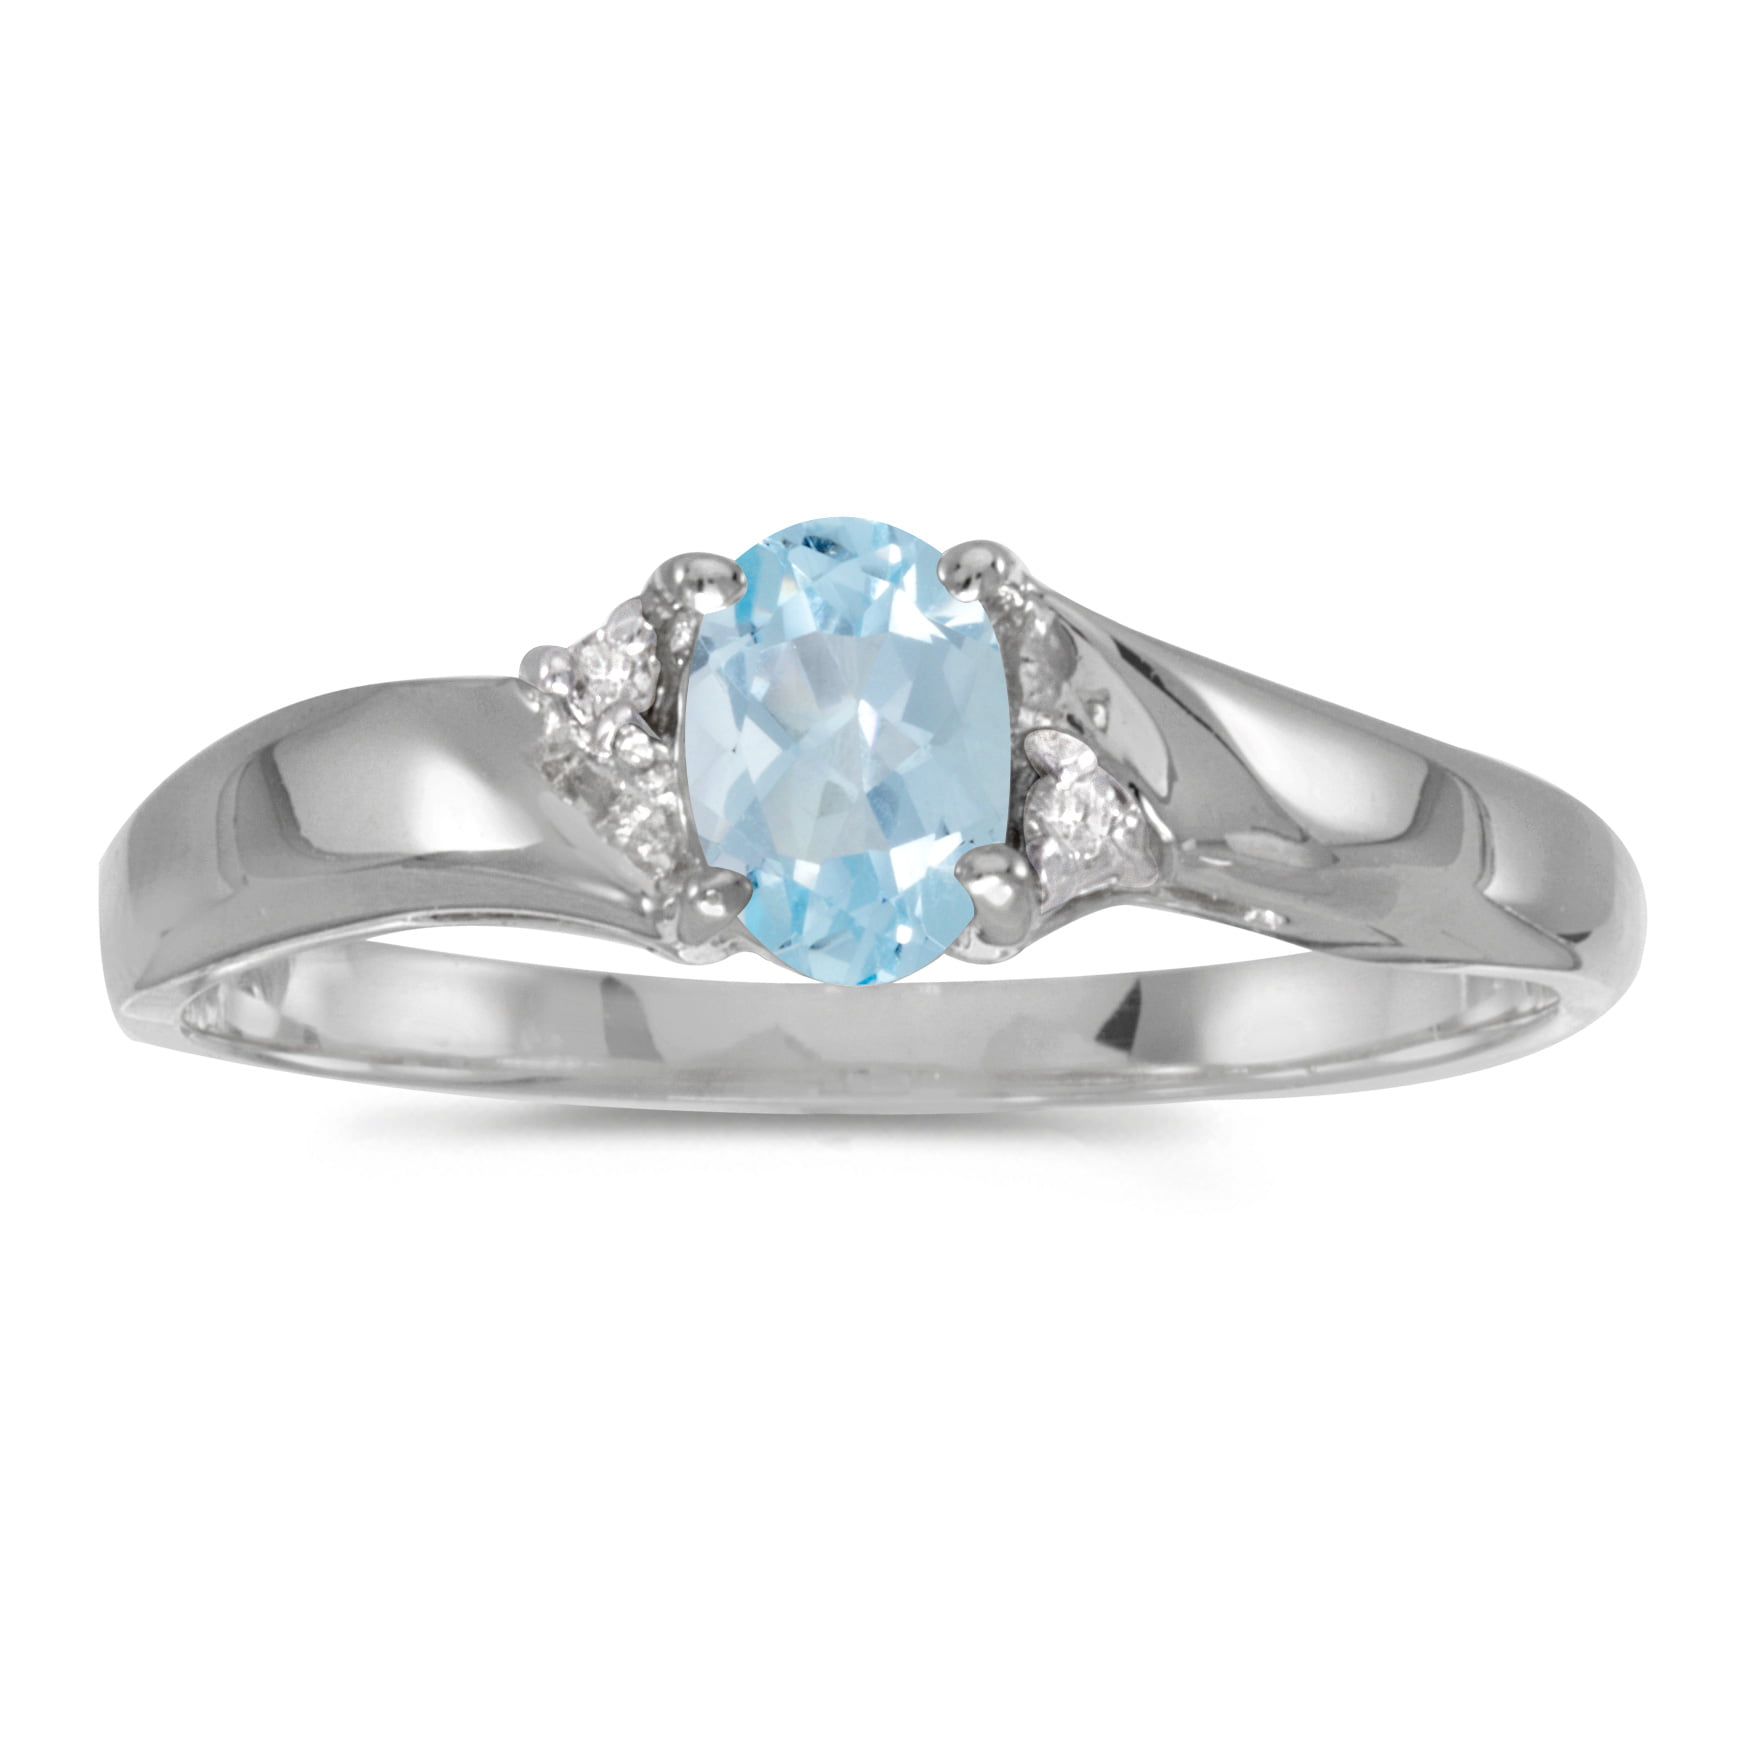 Details about   14k White Gold Oval Aquamarine And Diamond Ring 